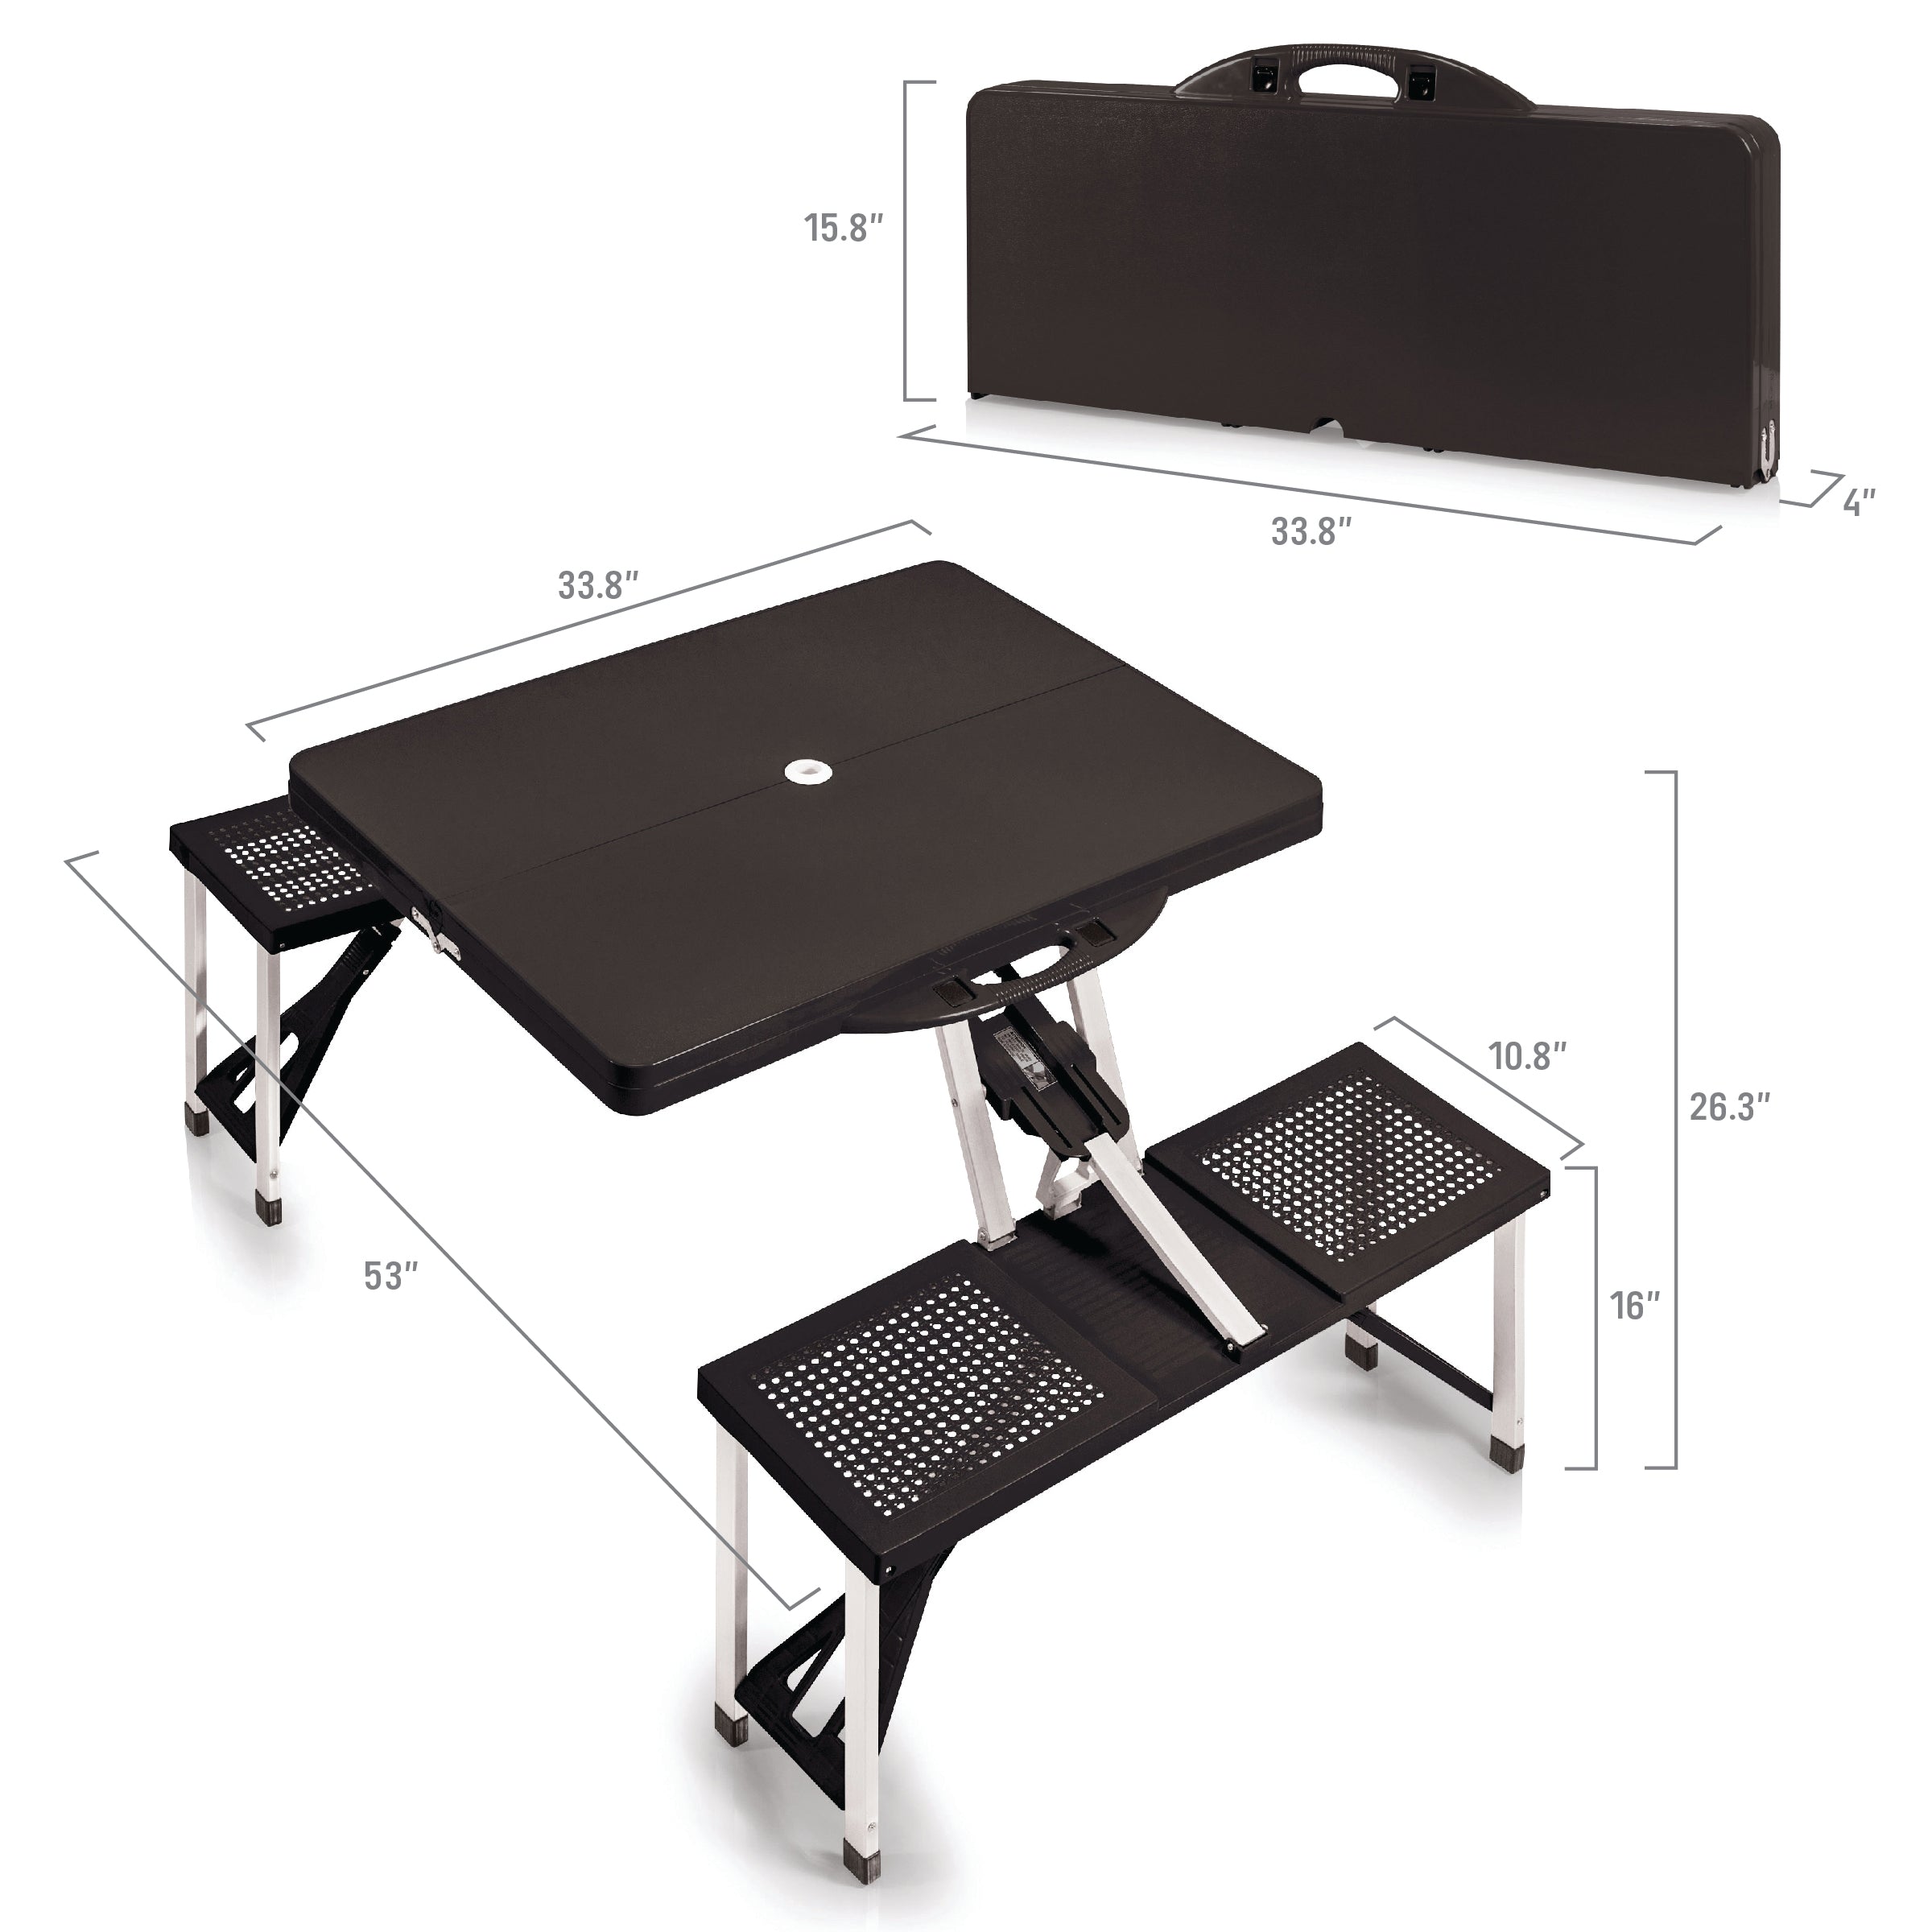 Purdue Boilermakers - Picnic Table Portable Folding Table with Seats